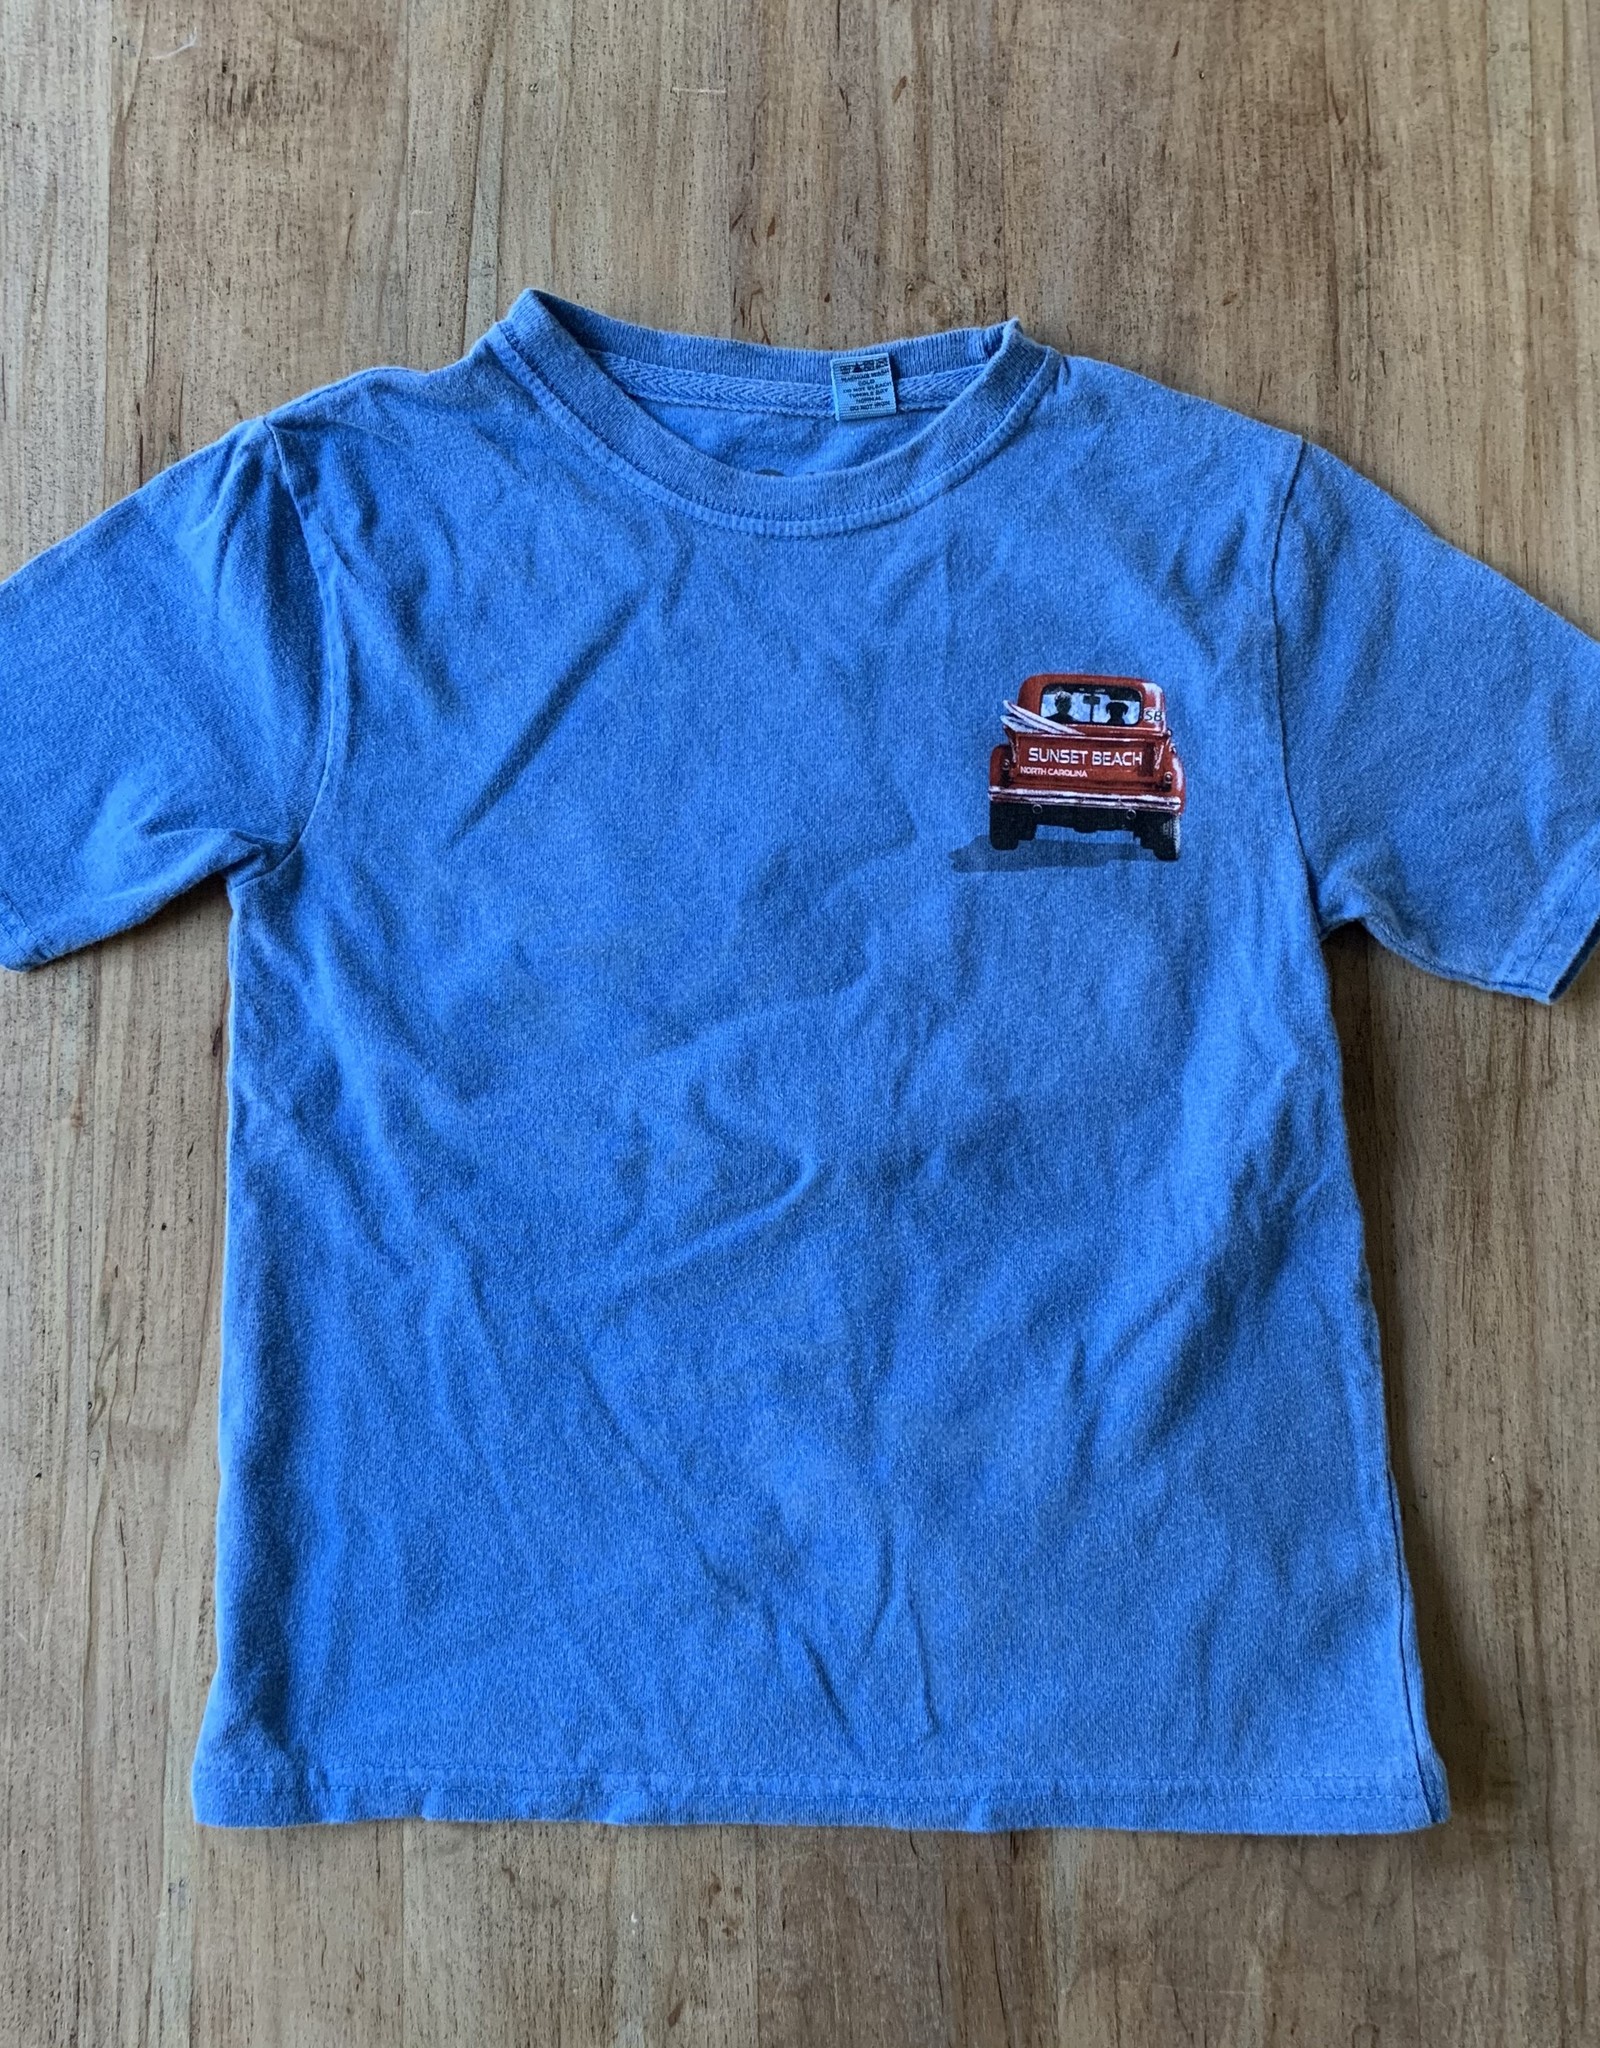 CLEARANCE ITEMS ESCAPE BUDDIE KIDS TEE